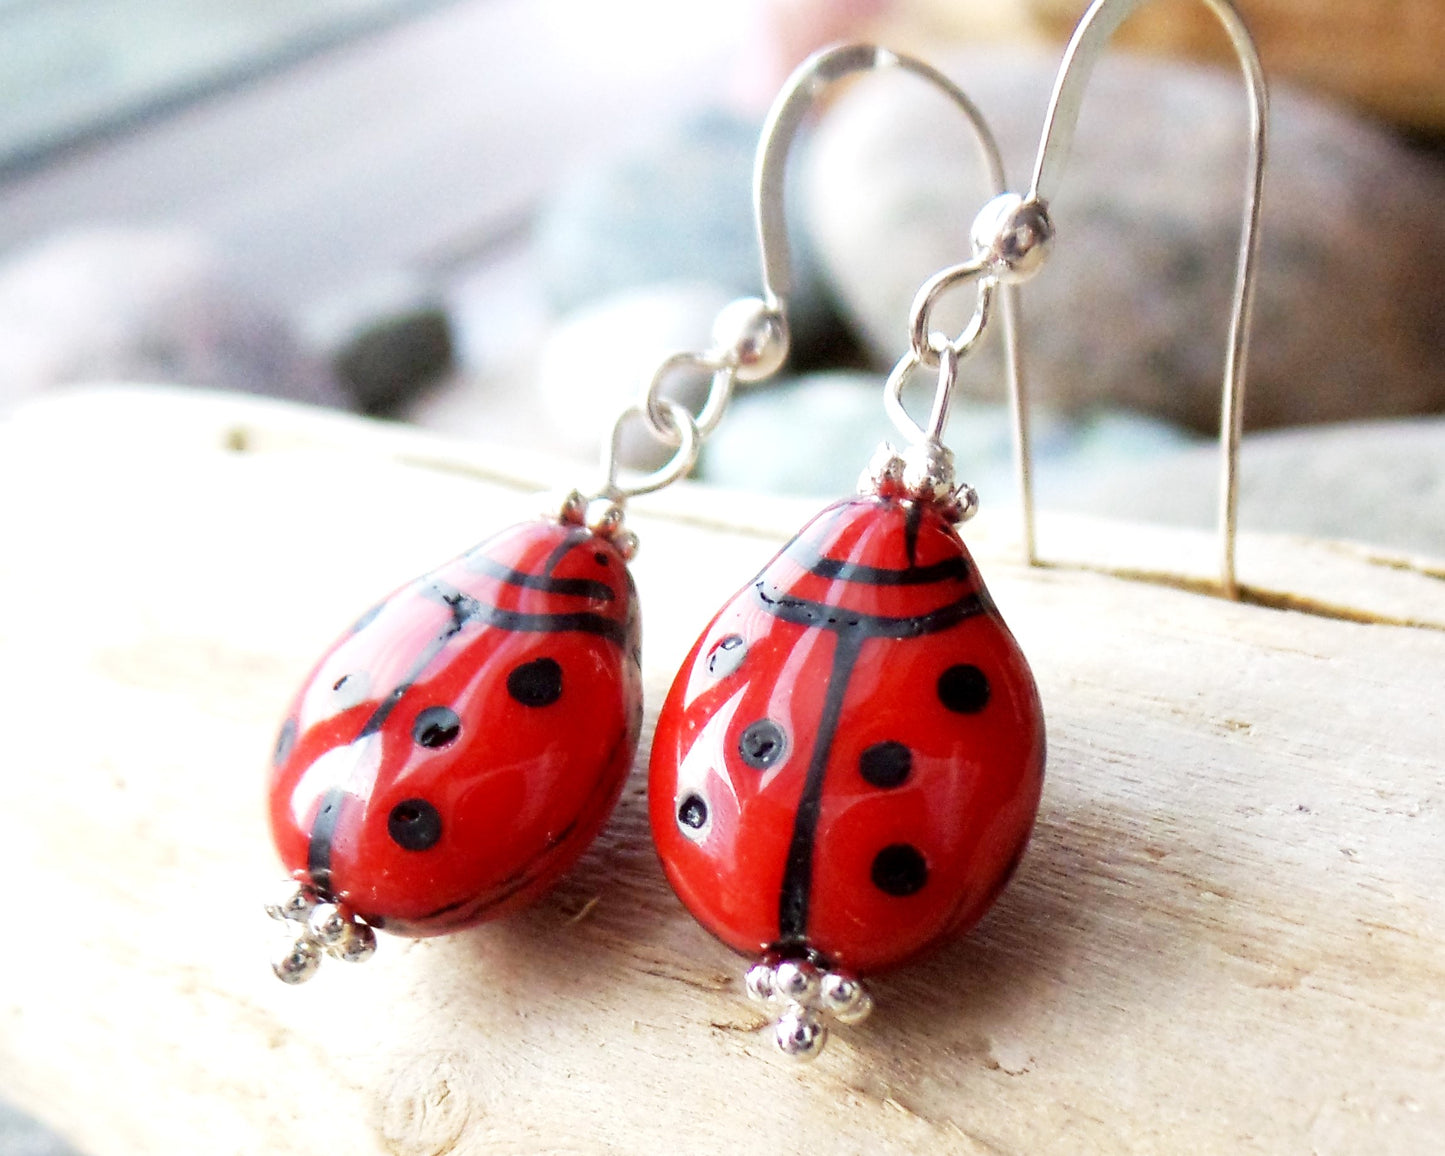 Ladybug Earrings made with solid 925 Sterling Silver and red glass Ladybugs